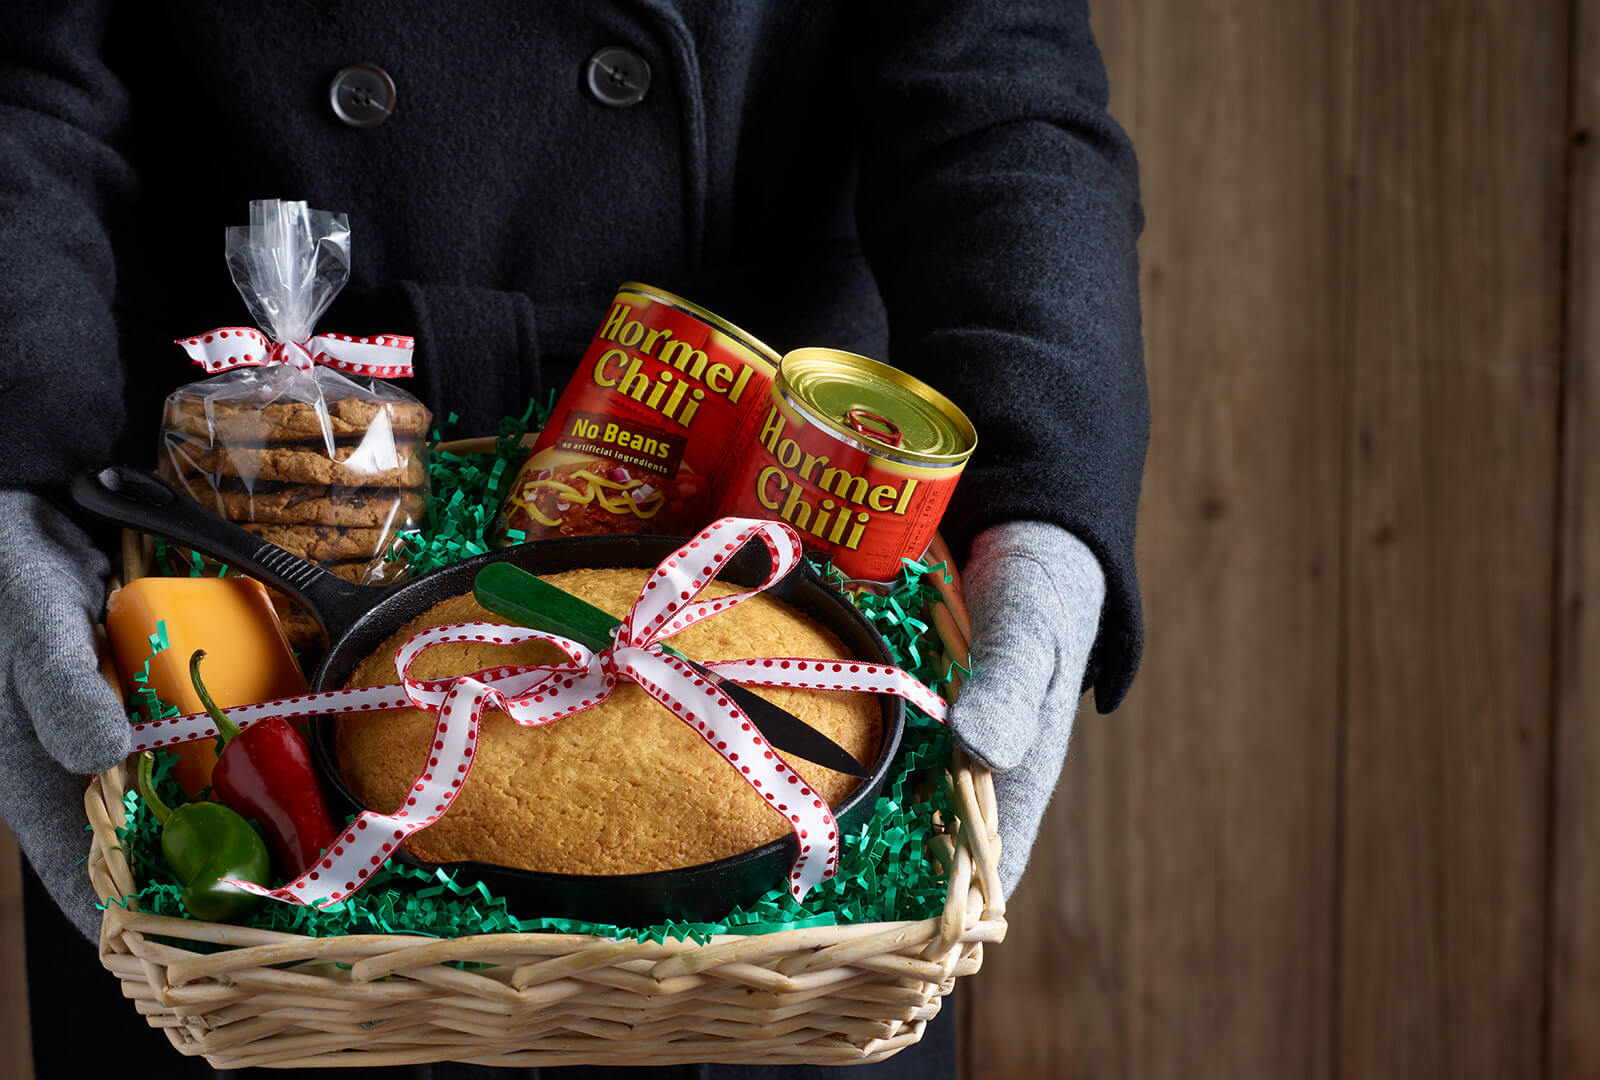 Holiday Basket Ideas Your Friends and Family will Love - Inspired - Hormel  Foods